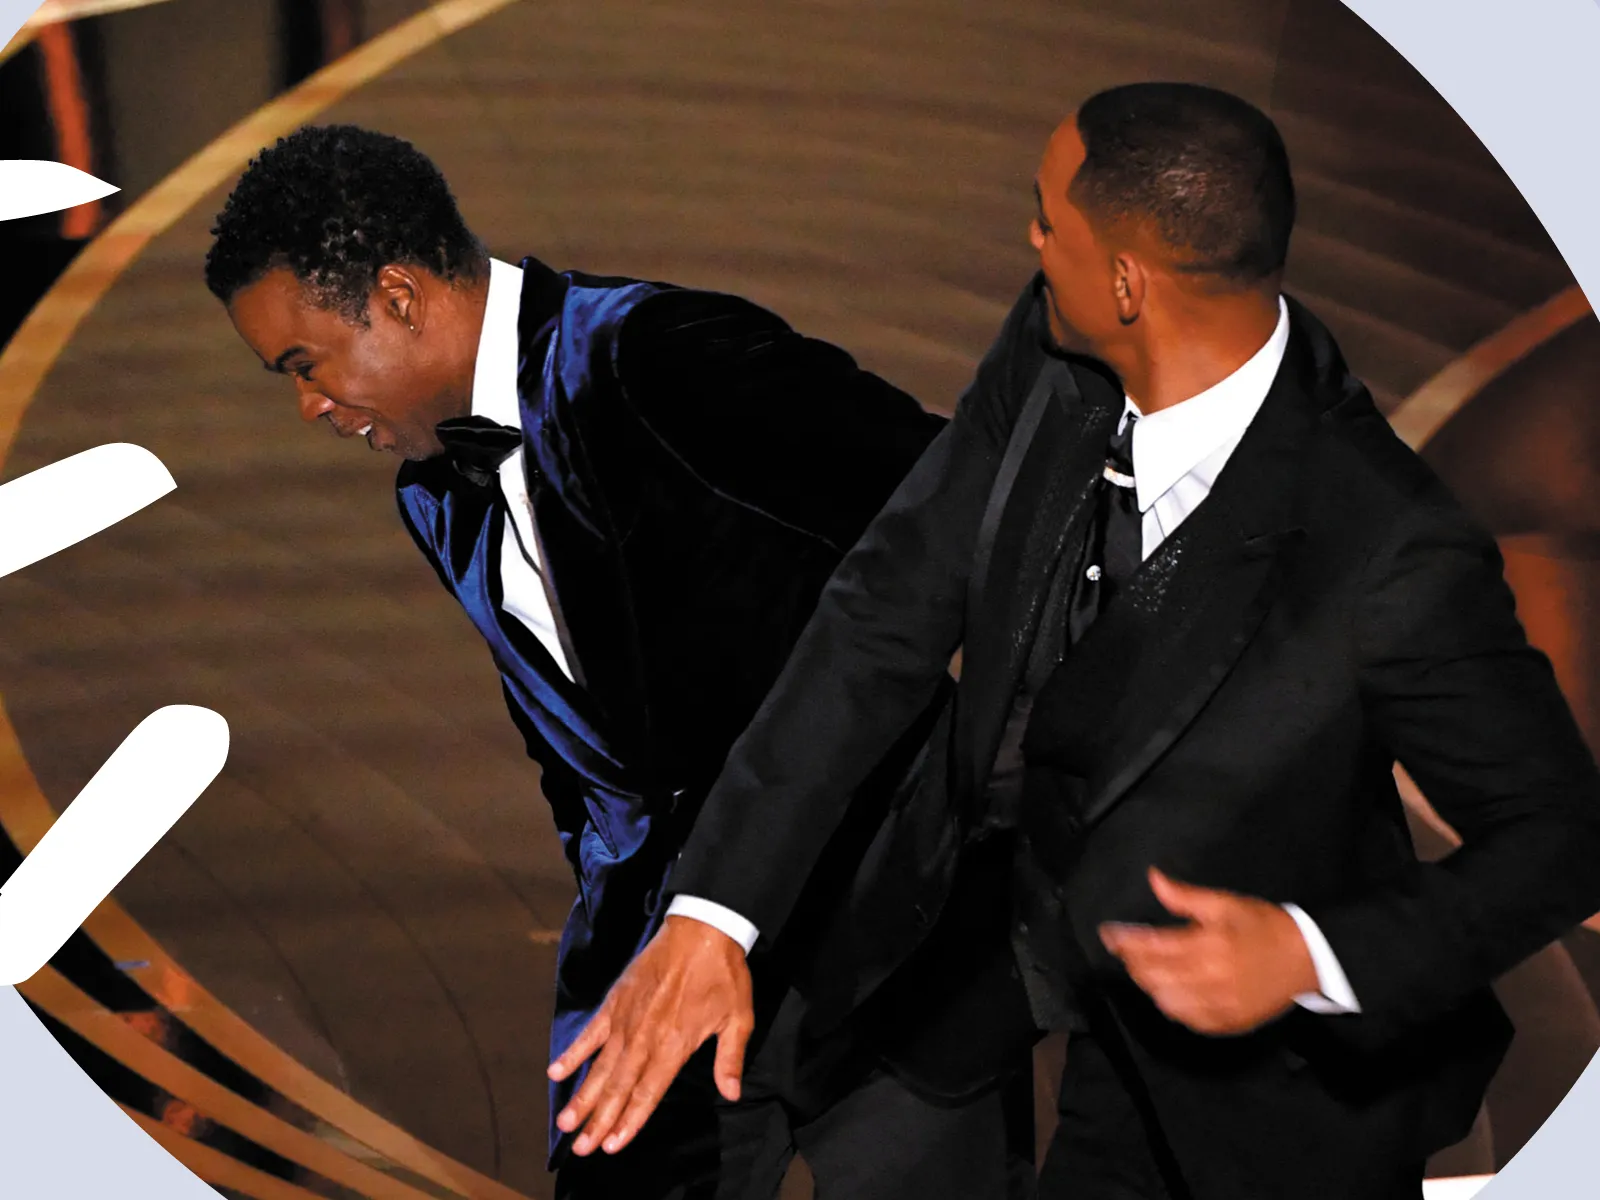 oscars-2022-will-smith-chris-rock-slapped-stars-gettyimages-1239559303.webp